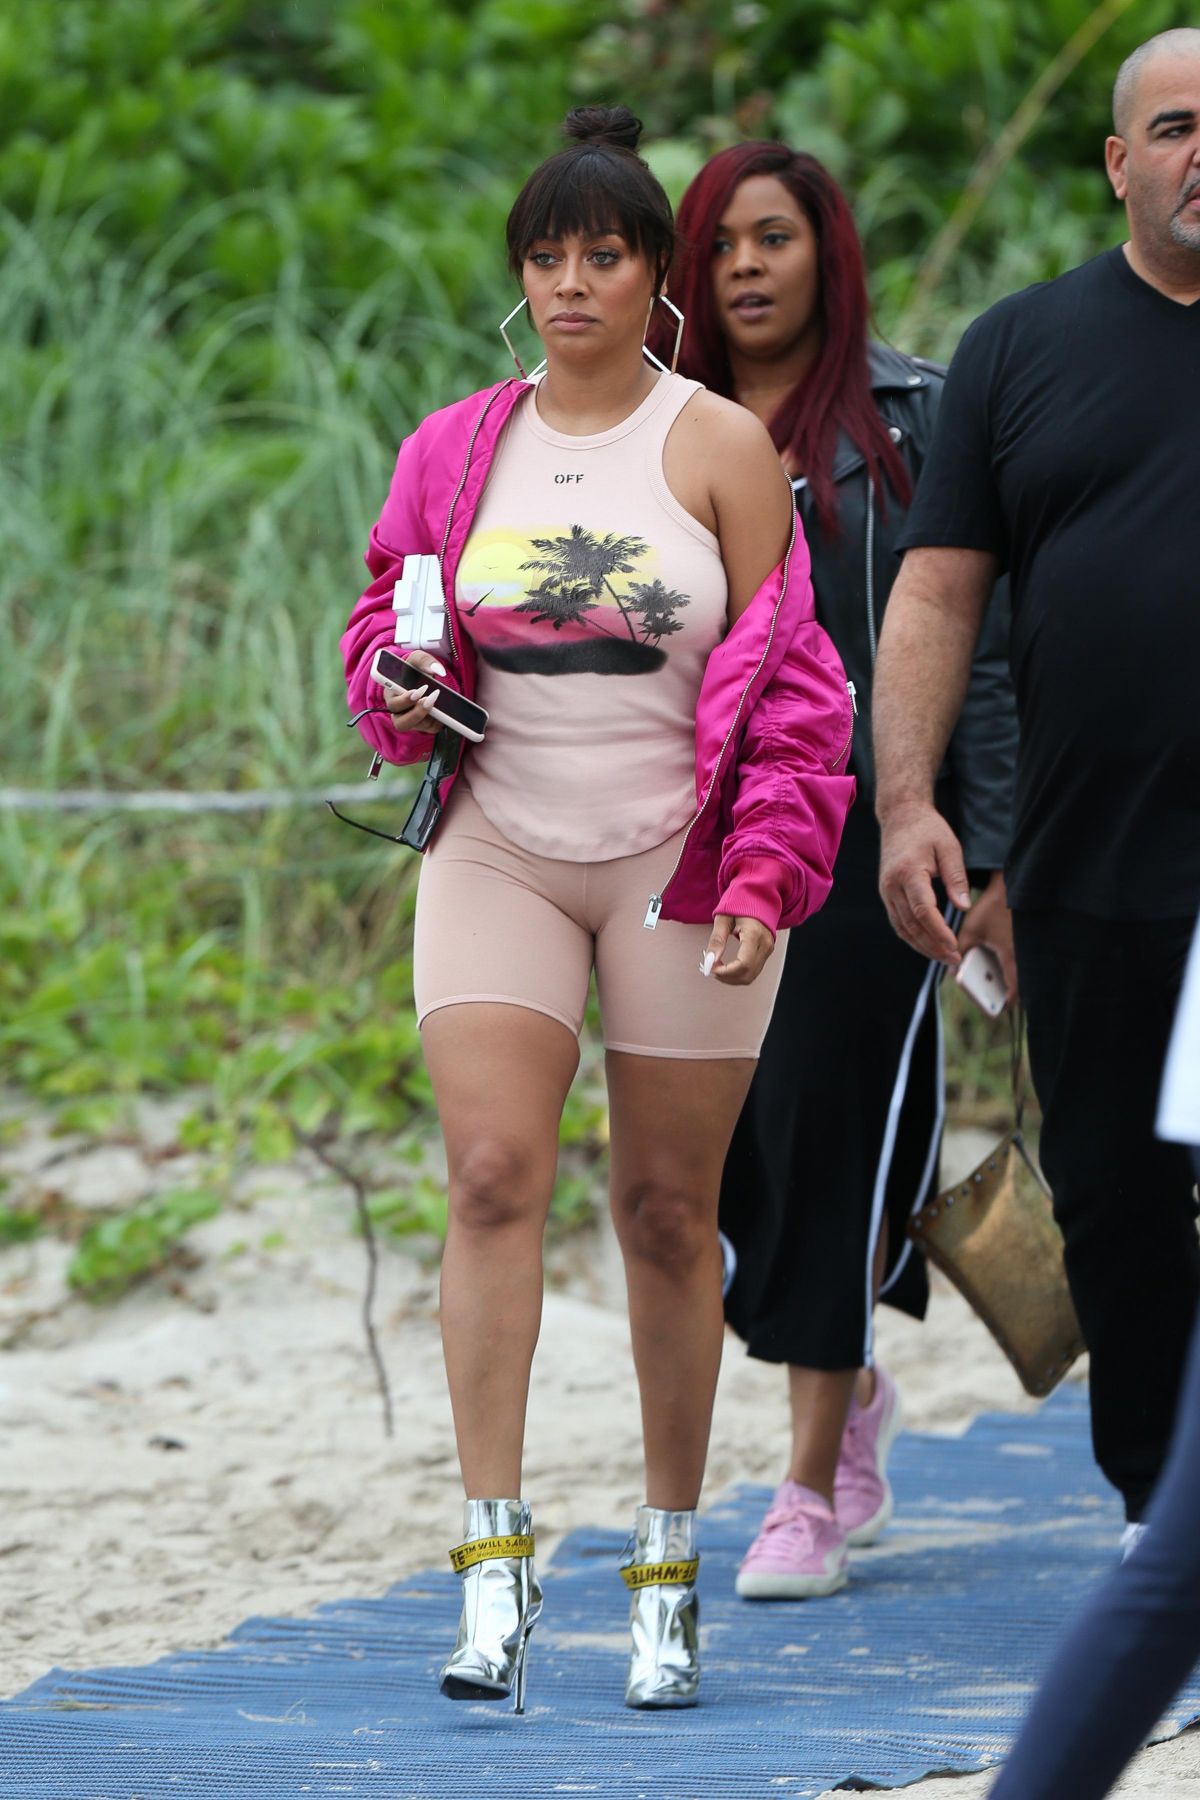 LALA ANTHONY at a Beach in Miami 12/09/2017.